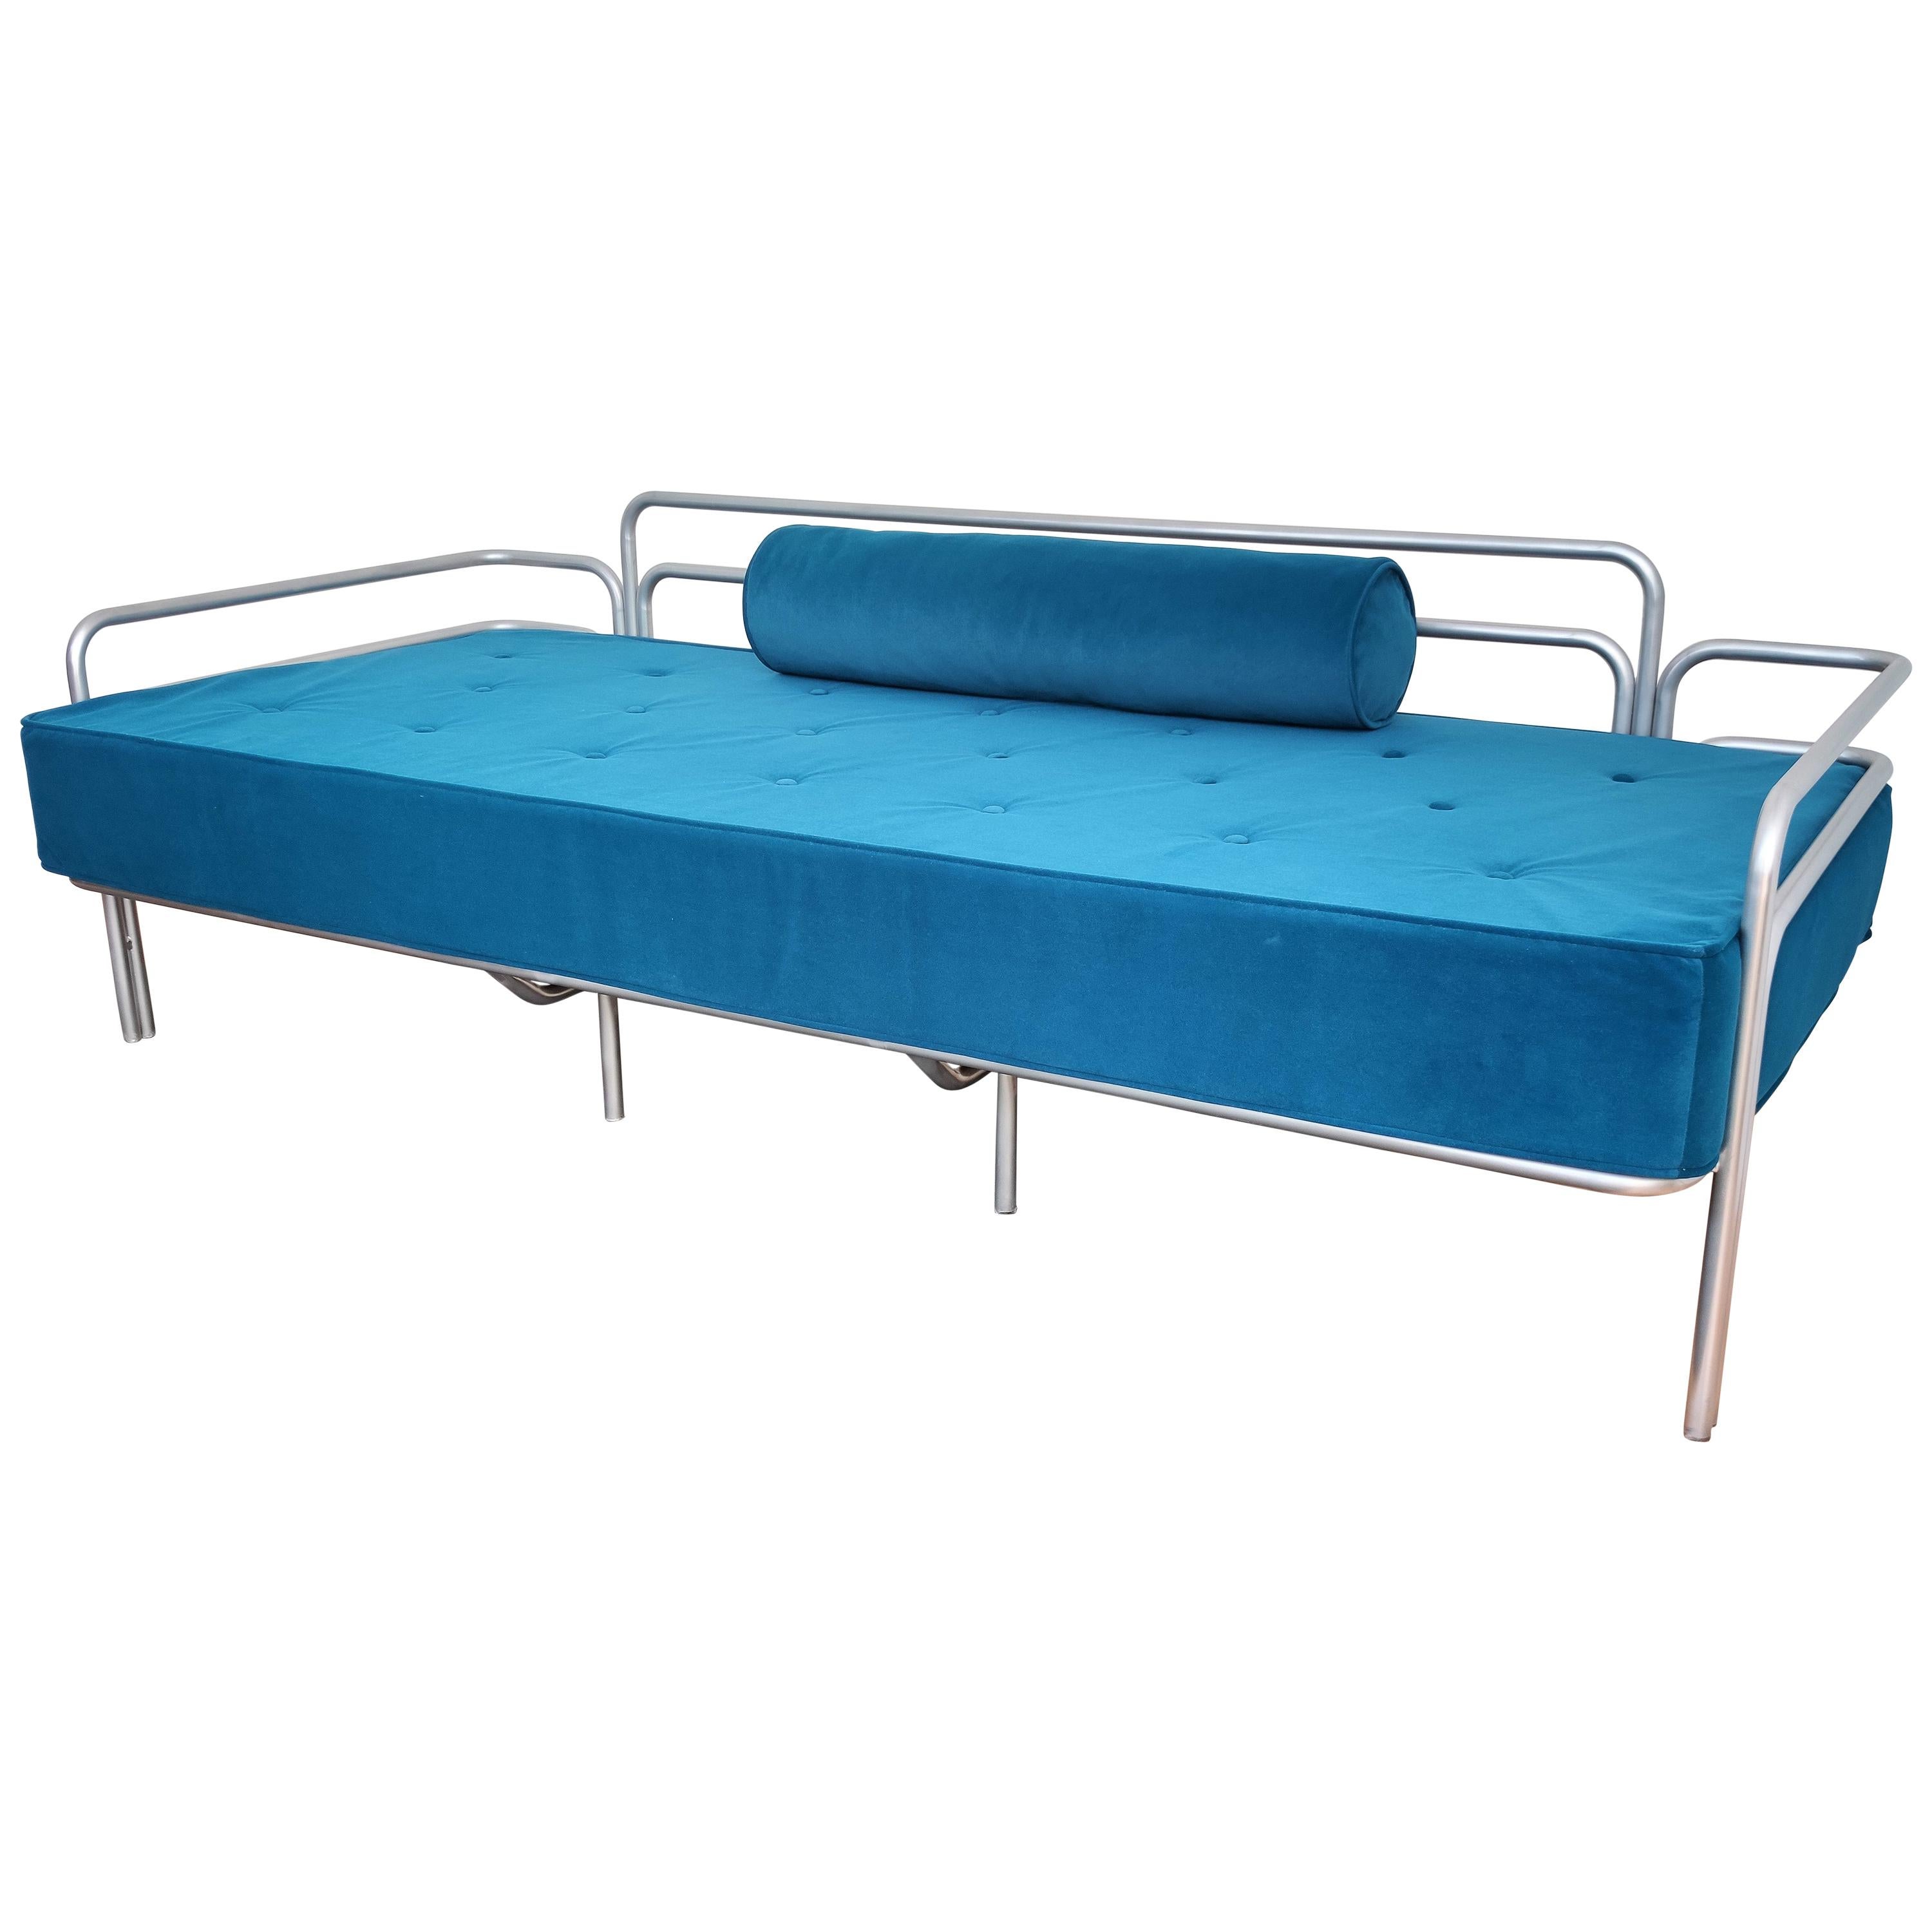 1960s Italian Steel and Tufted Velvet Blue Re-Upholstered Sofa or Daybed